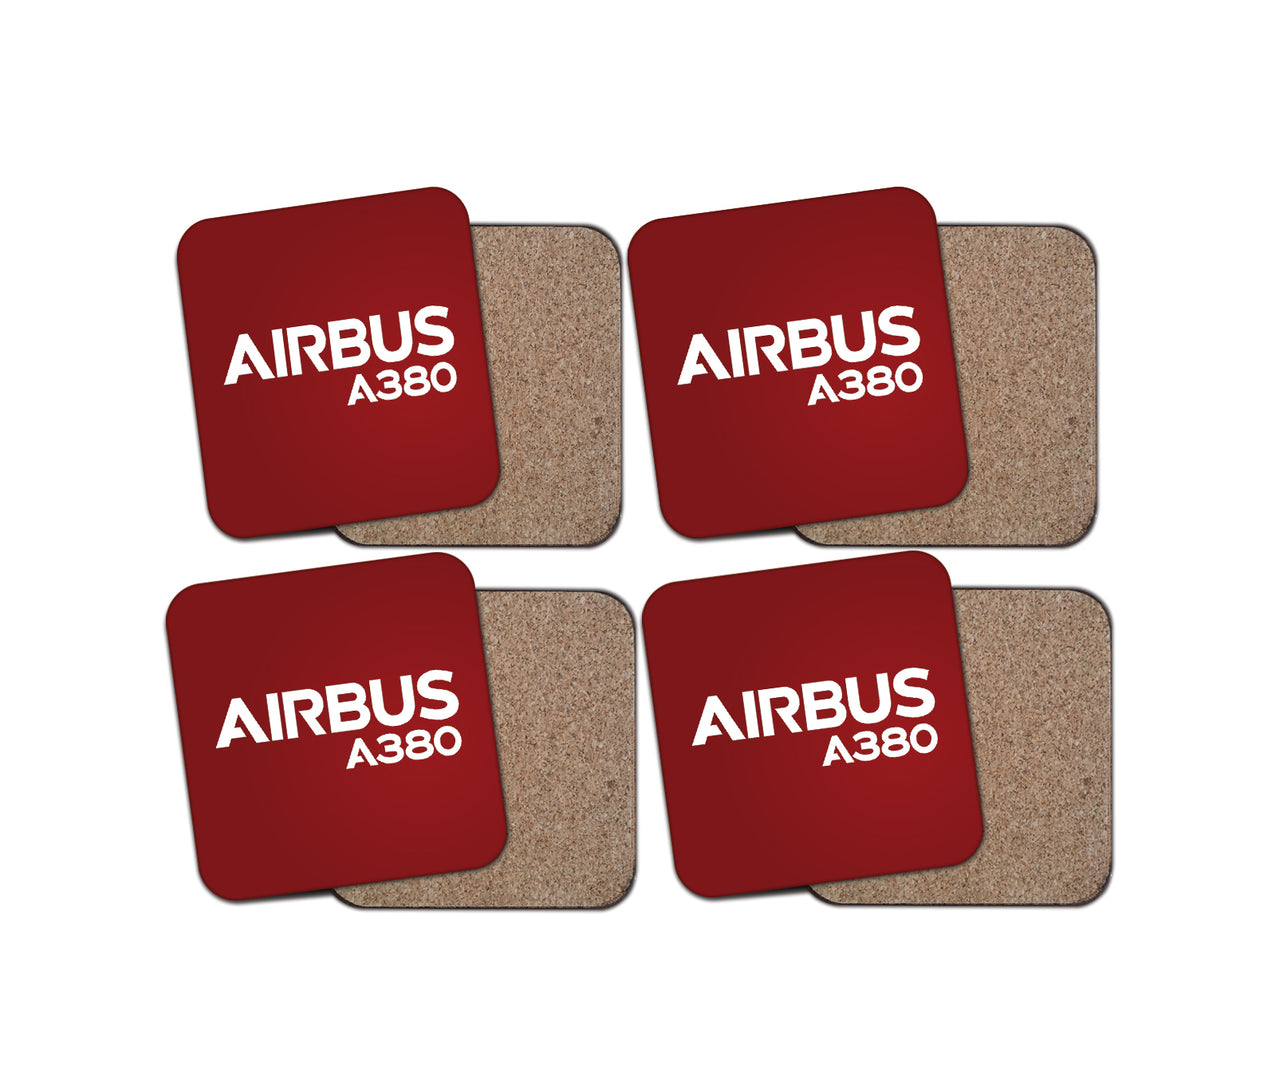 Airbus A380 & Text Designed Coasters